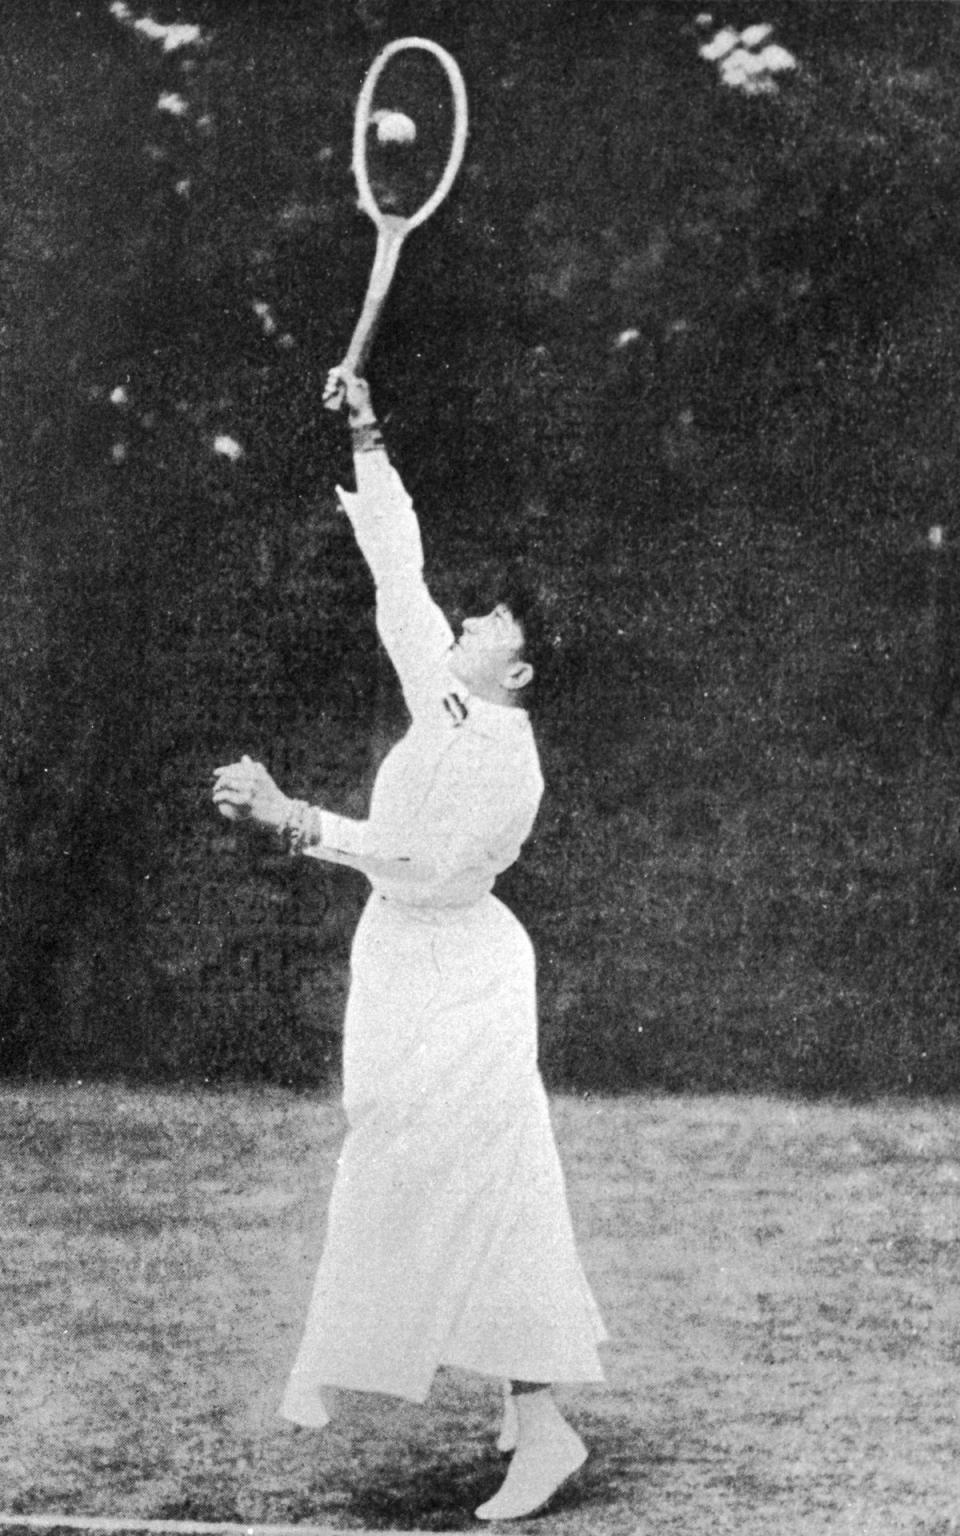 Henman's great-grandmother, Ellen Stowell-Brown, the first woman to serve overarm at Wimbledon